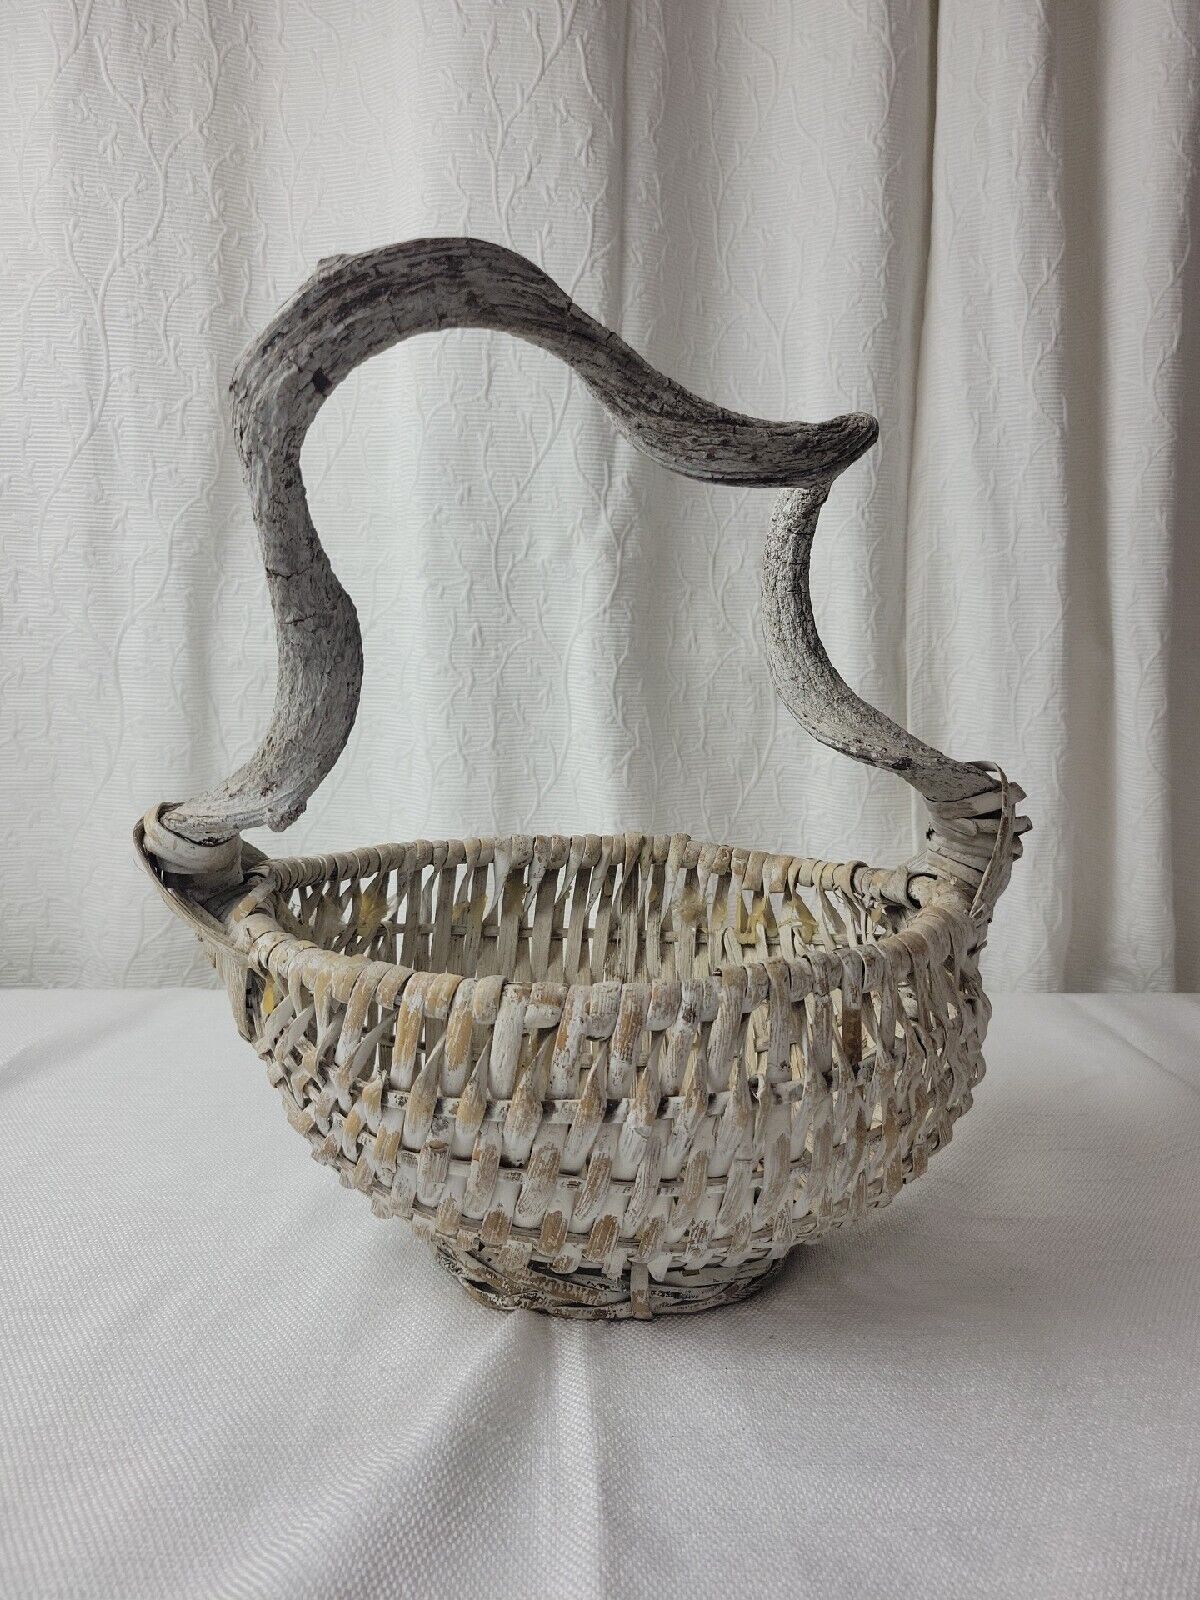 Unique Woven Basket White-Washed Twisted Vine Branch Handle Large Size 